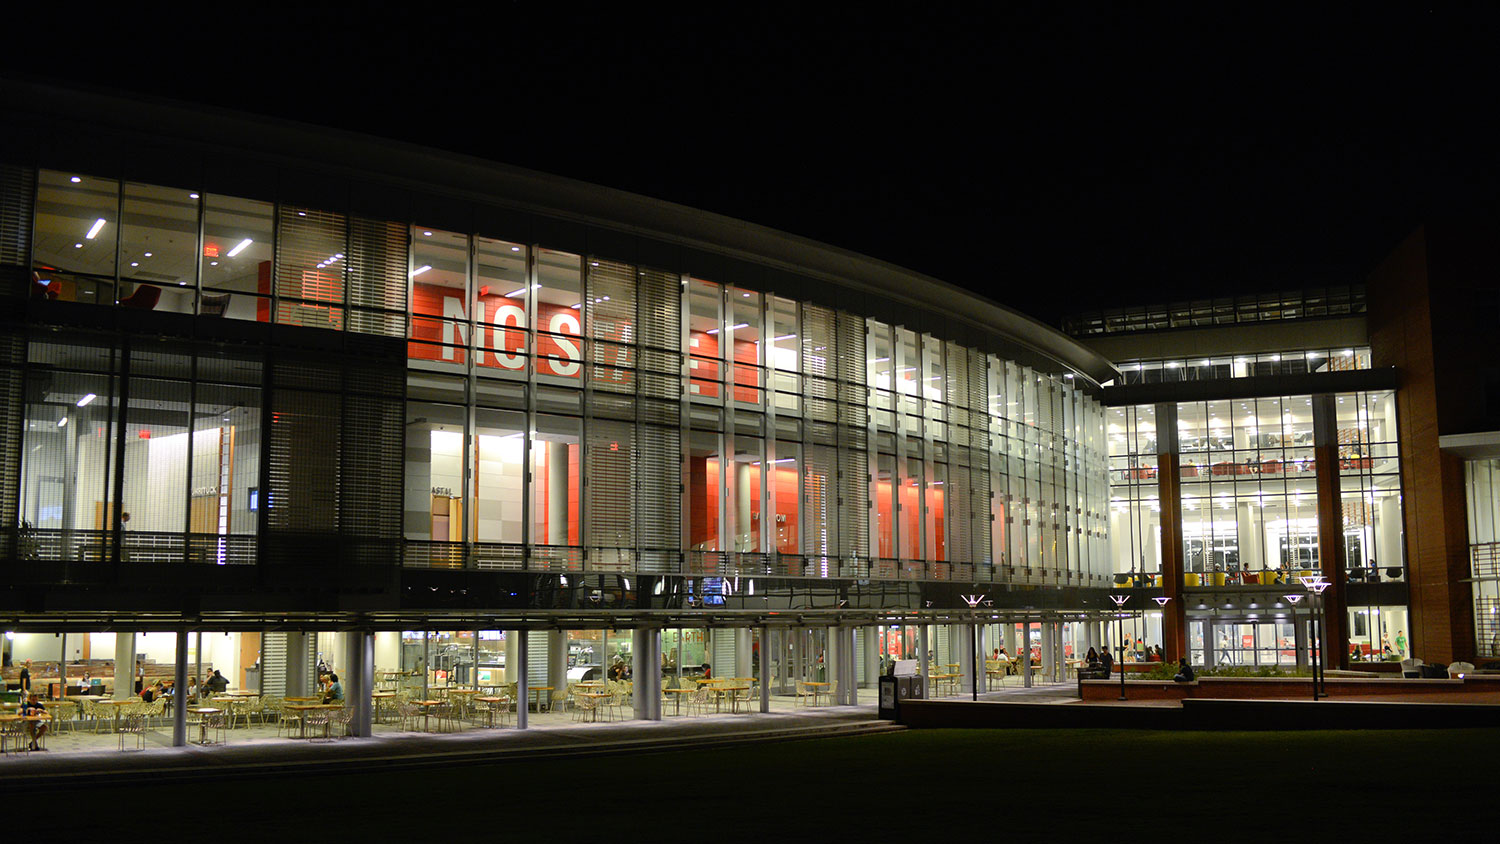 Talley Student Center at night